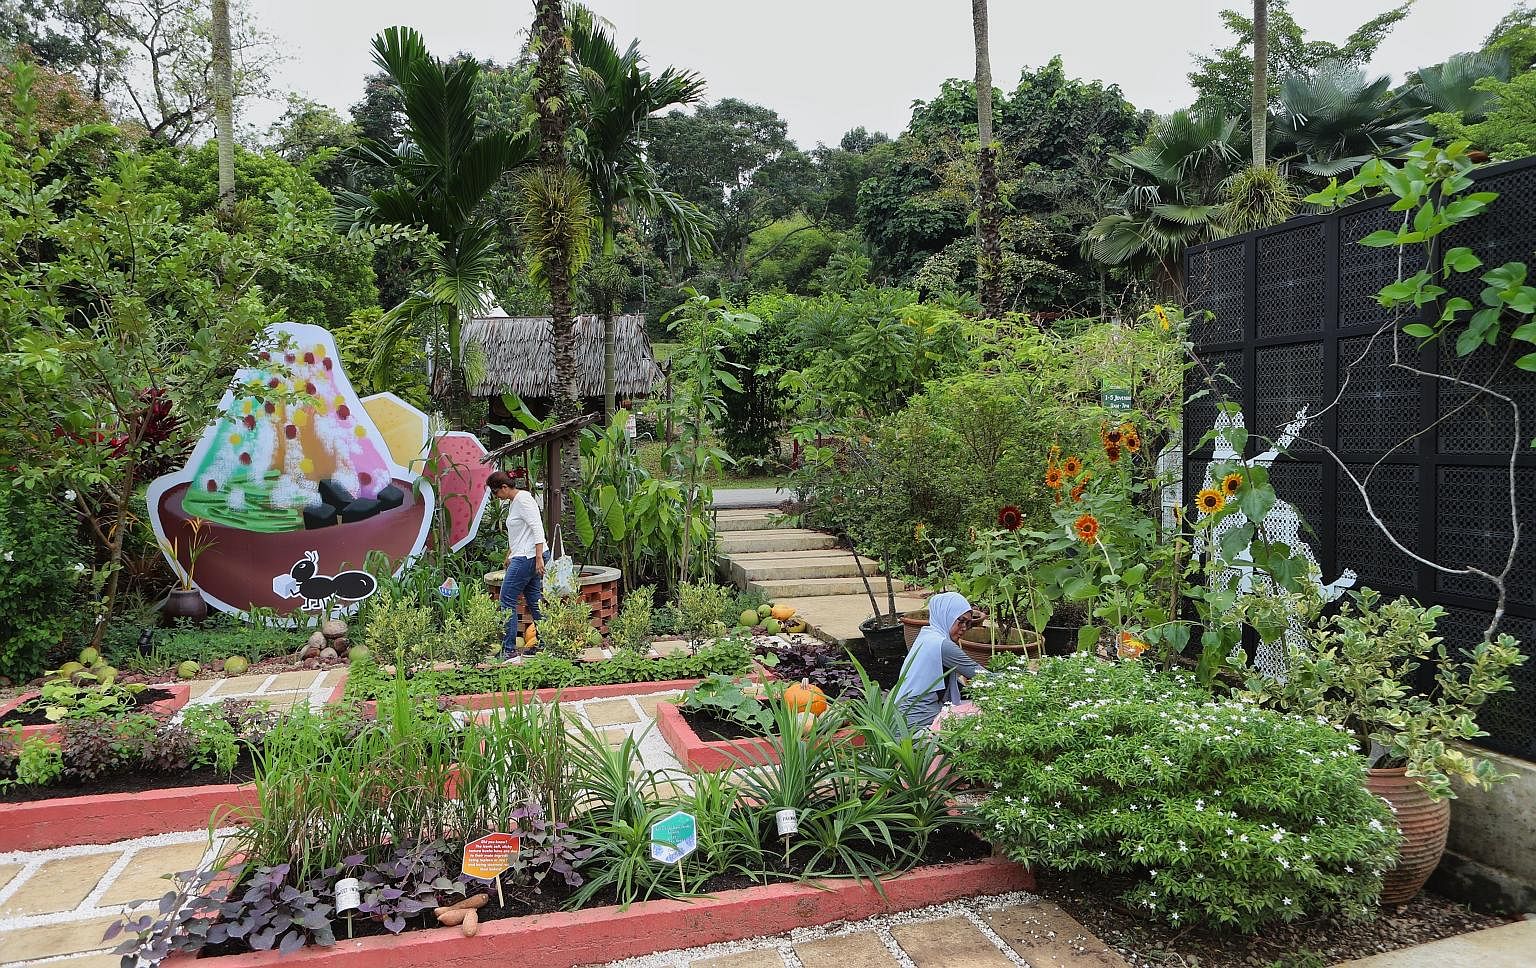 The Balik Kampung garden display focuses on local desserts such as ice kachang, featuring plants that produce the ingredients that go into them. The centrepiece at the festival, held from today to Sunday, is a 3m-tall, over 200kg crimson bird made of